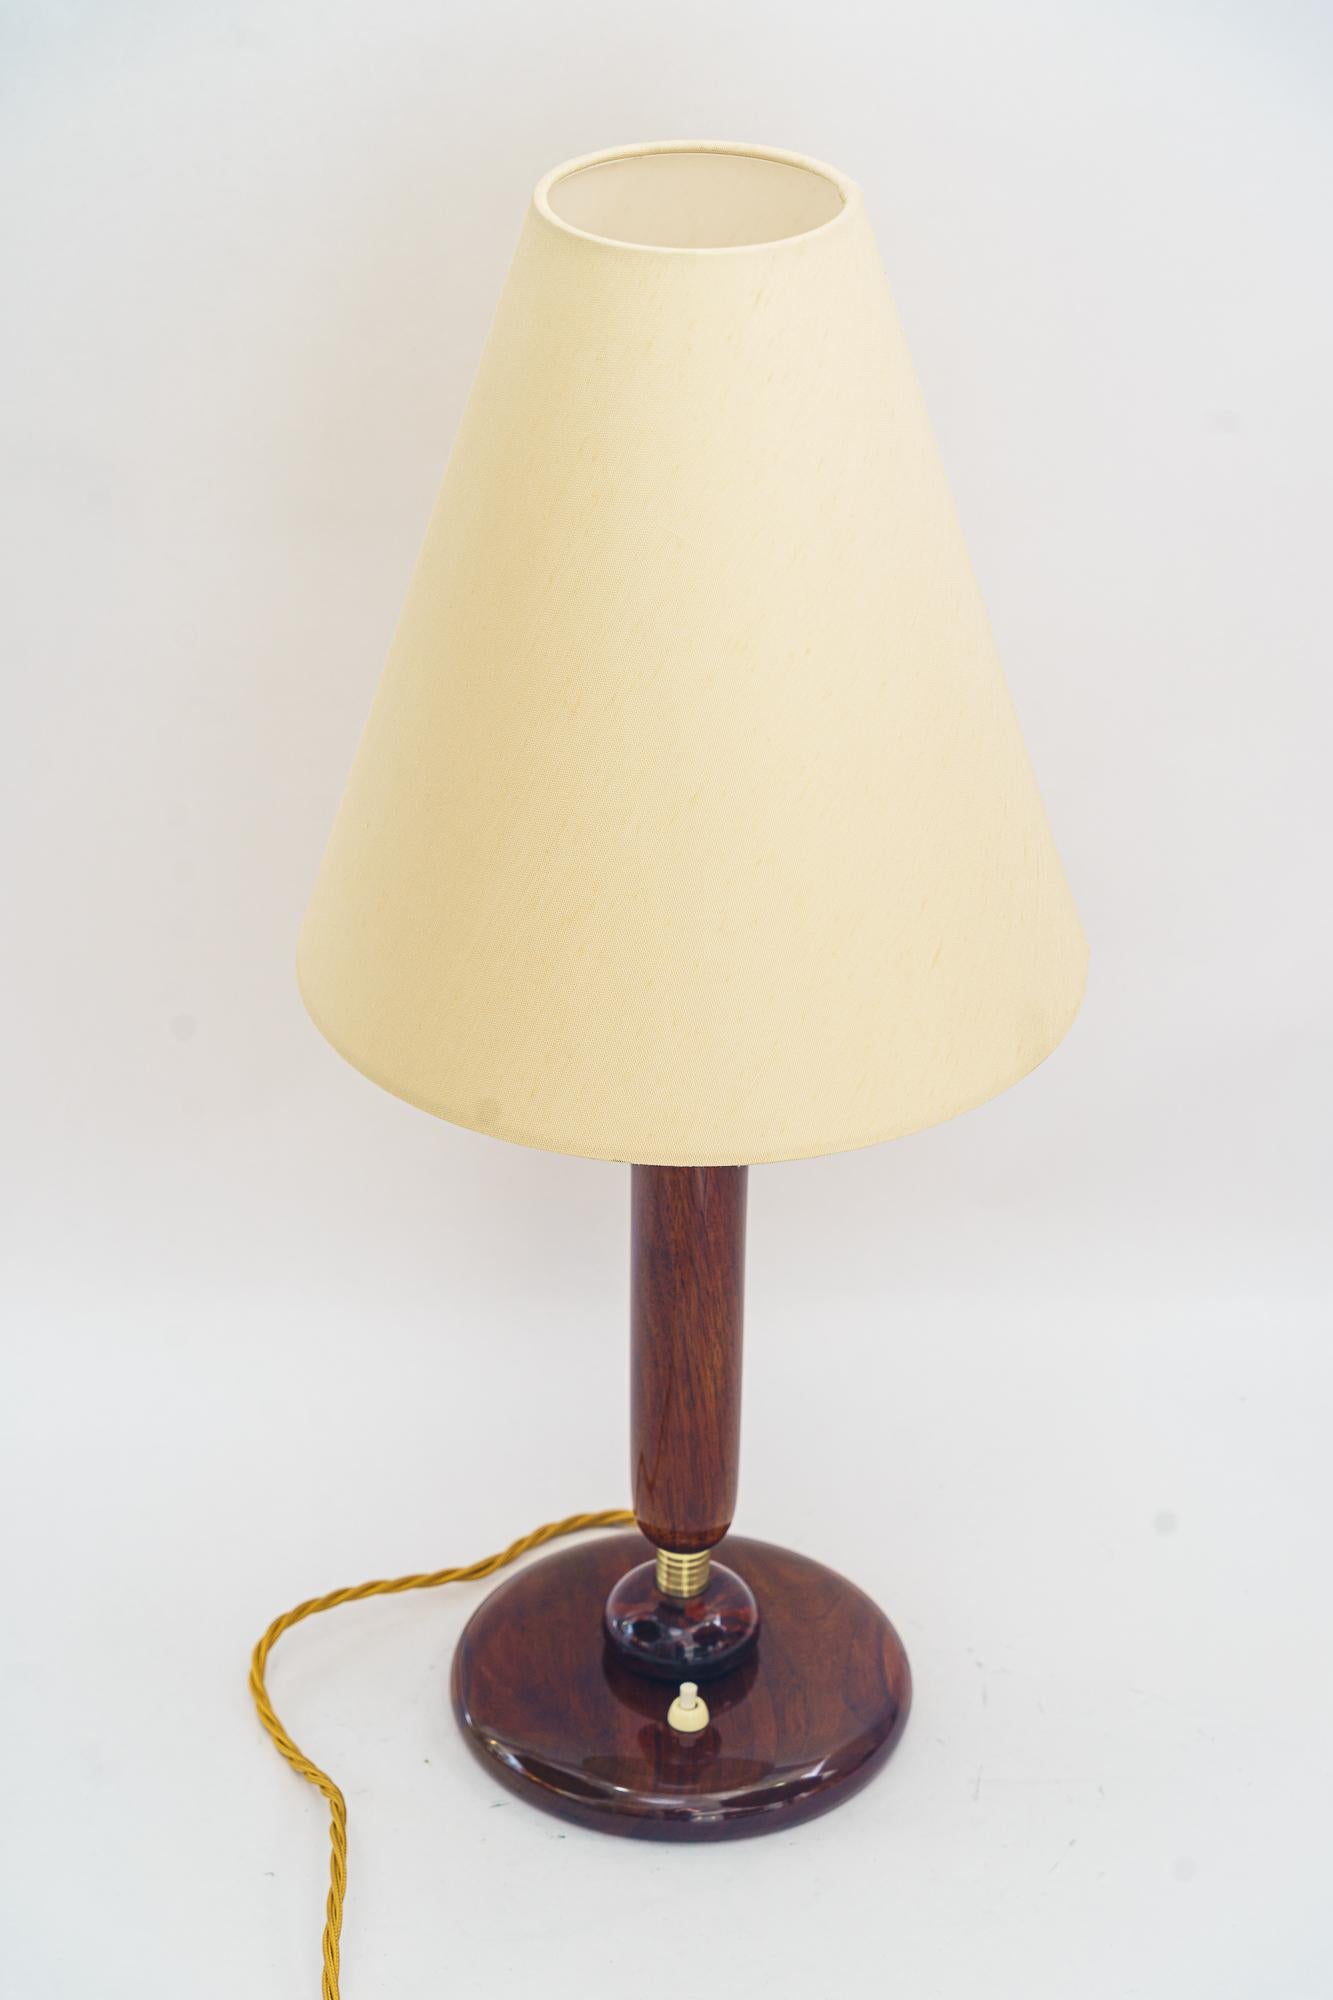 Big Art Deco wood Table lamp vienna around 1930s
Wood polished
Brass polished and stove enameled
The fabric shade is replaced (new) 